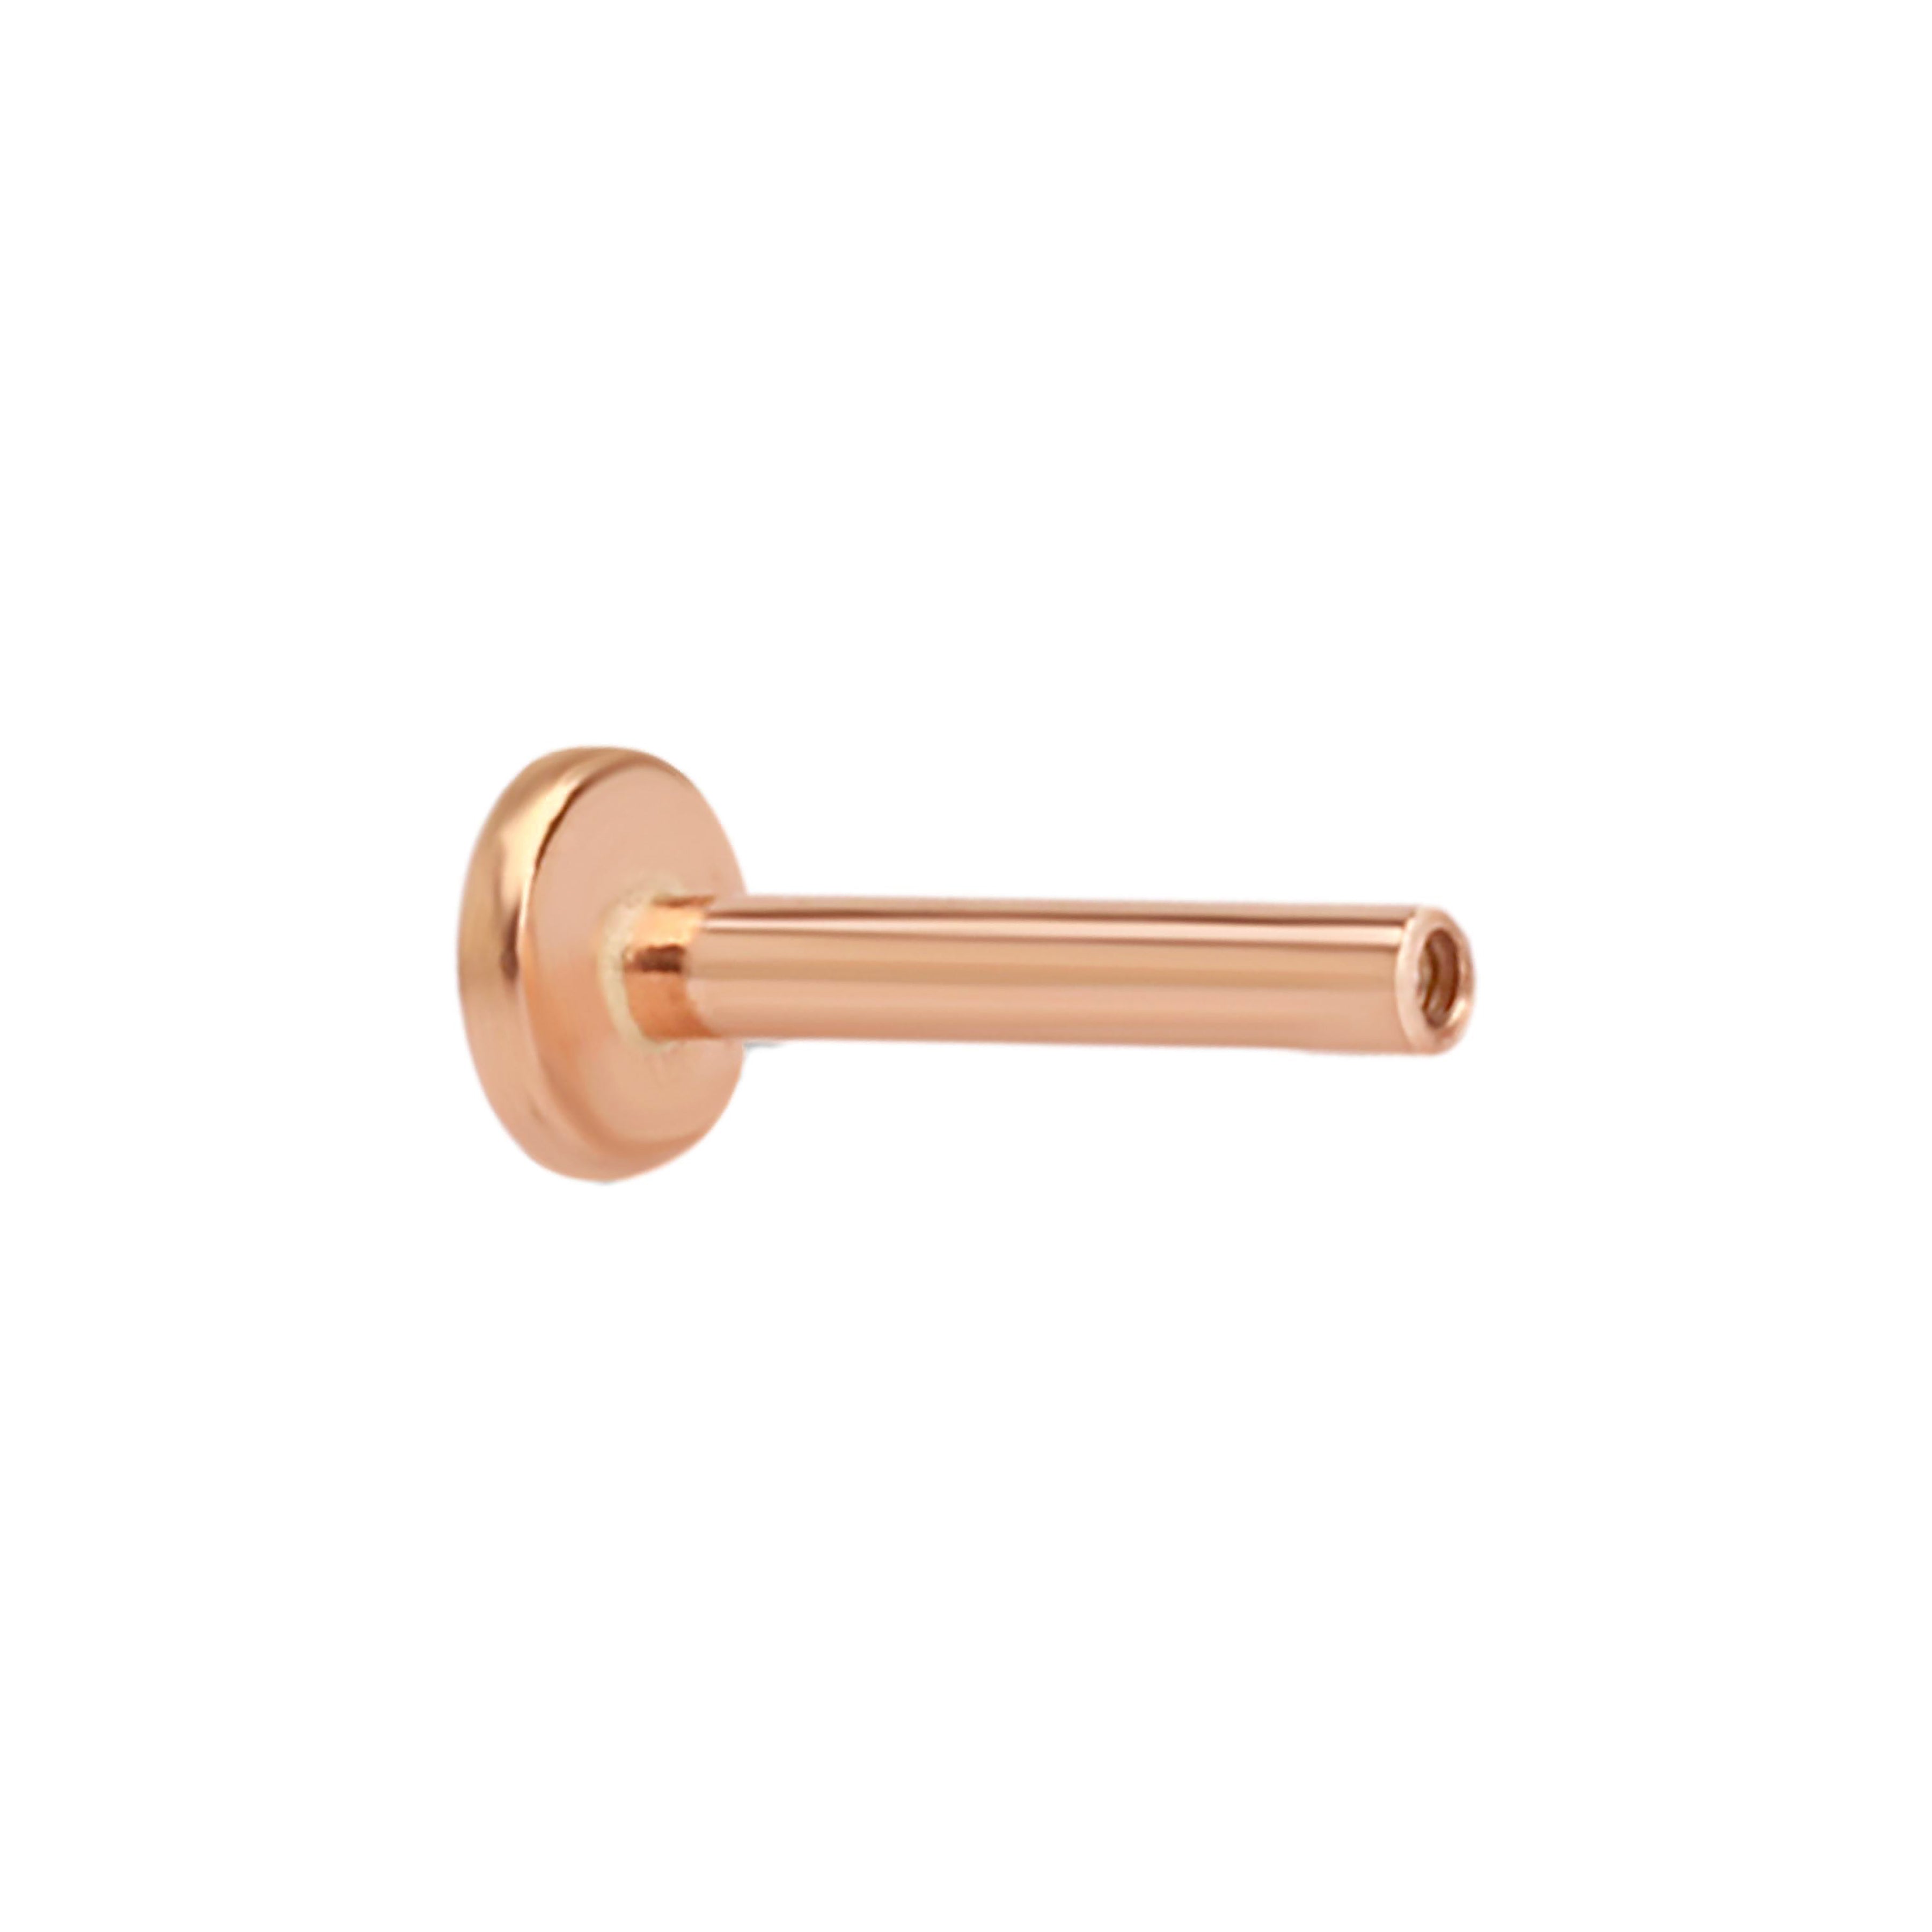 Flat Back in Solid 14k Gold (Internally Threaded) Estella Collection #product_description# 14k Flat Back Stud Earrings Ready to Ship #tag4# #tag5# #tag6# #tag7# #tag8# #tag9# #tag10# 14k Rose Gold 5MM